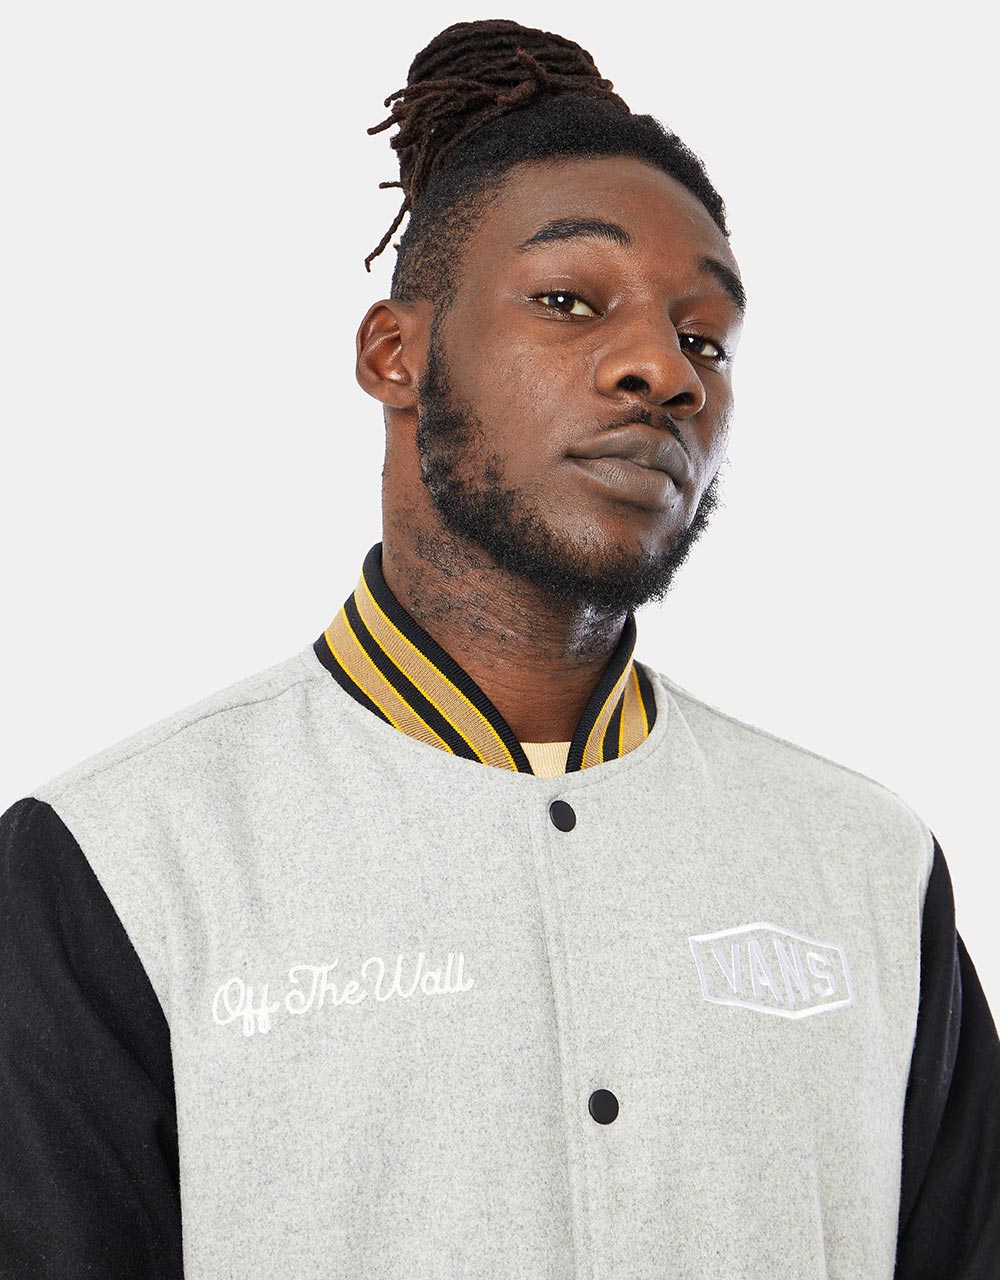 Vans Checkerboard Research Varsity Jacket - Charcoal Heather